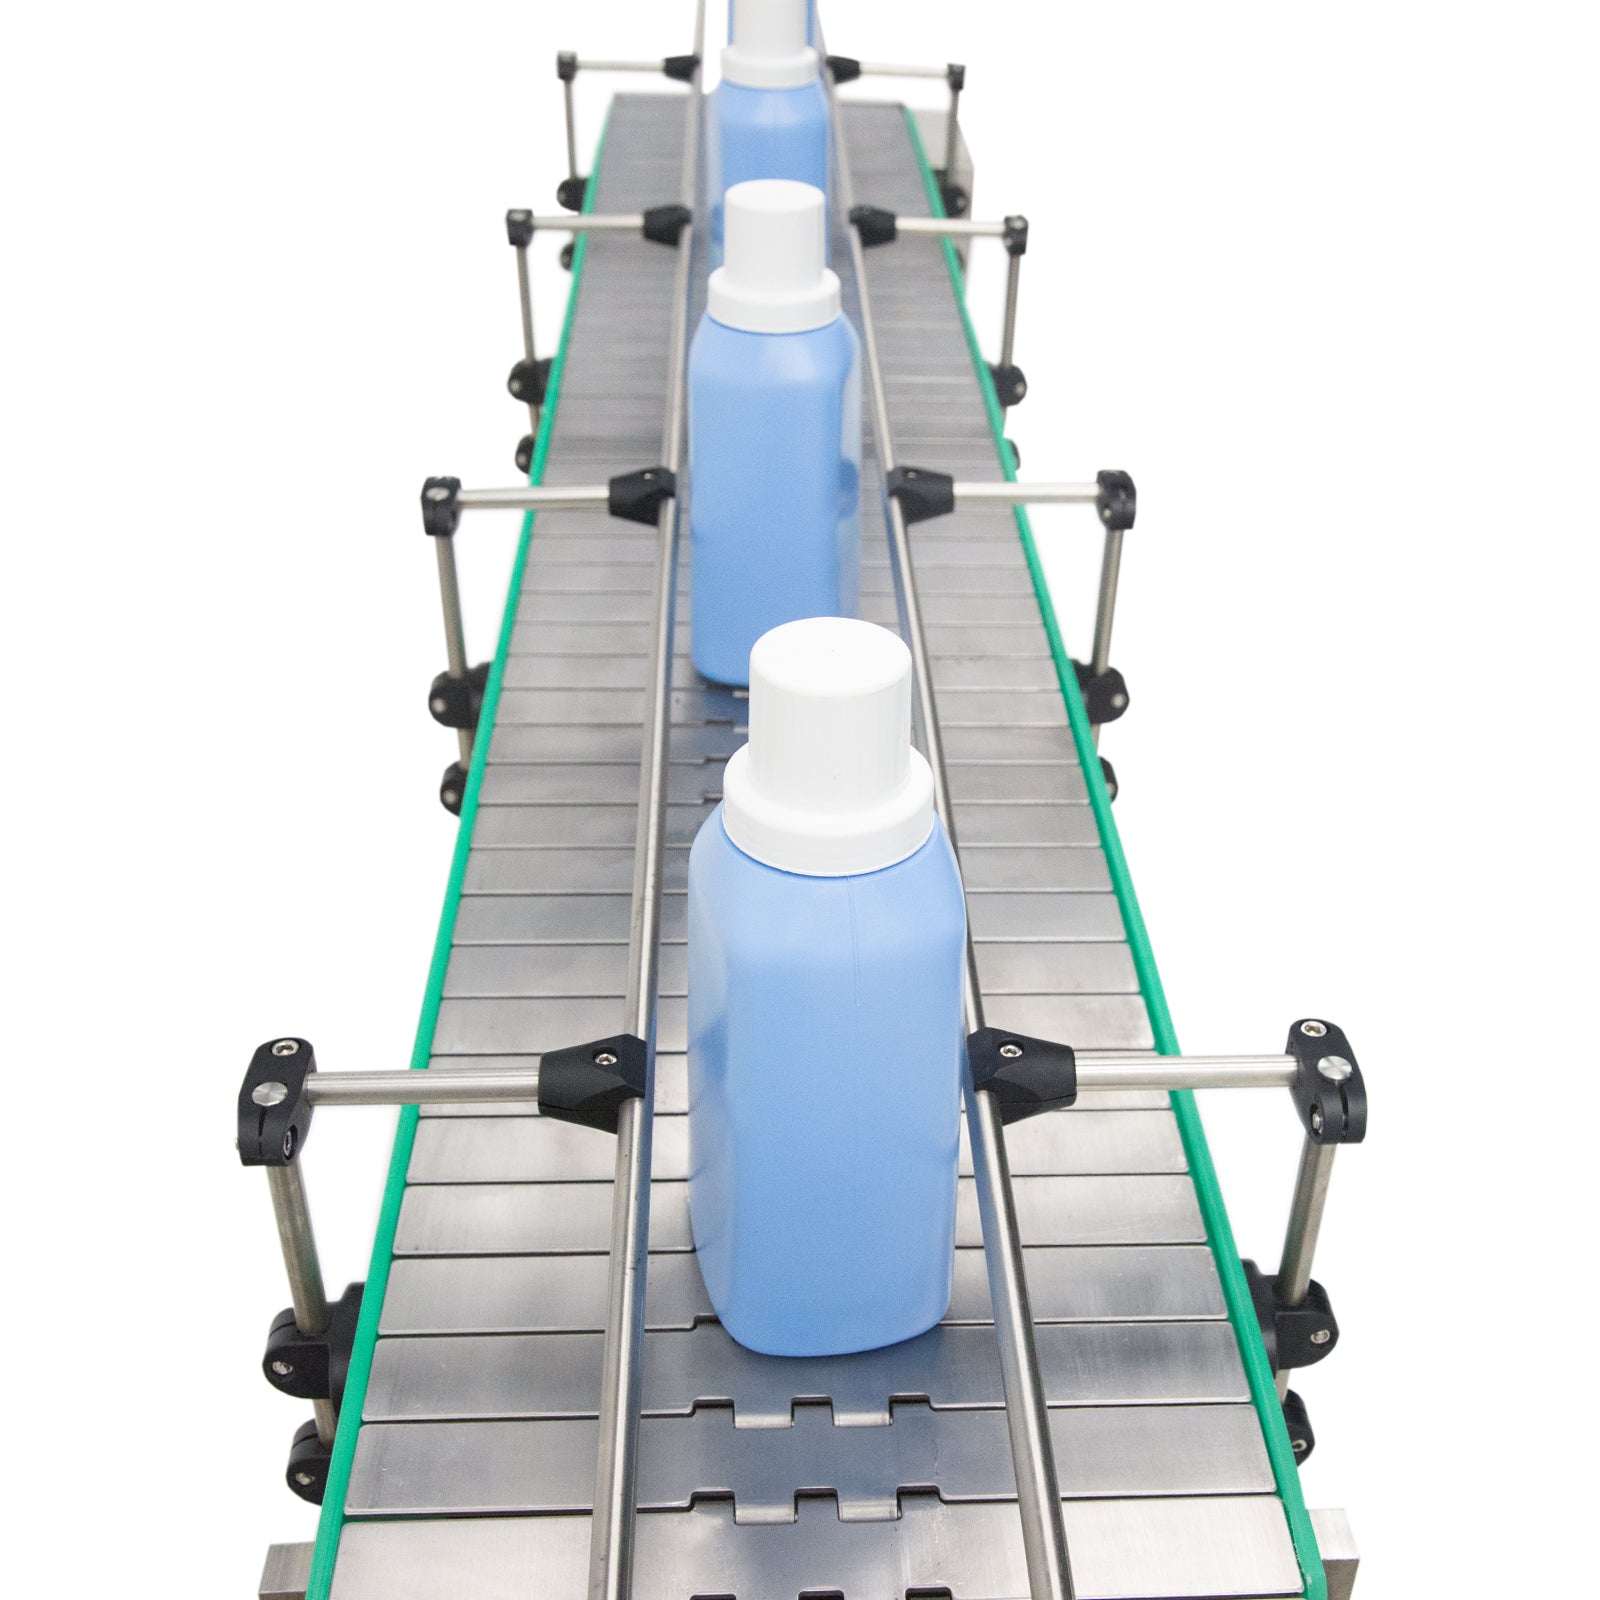 Top view image shows 3 bottles perfectly aligned on top of a stainless steel motorized conveyor